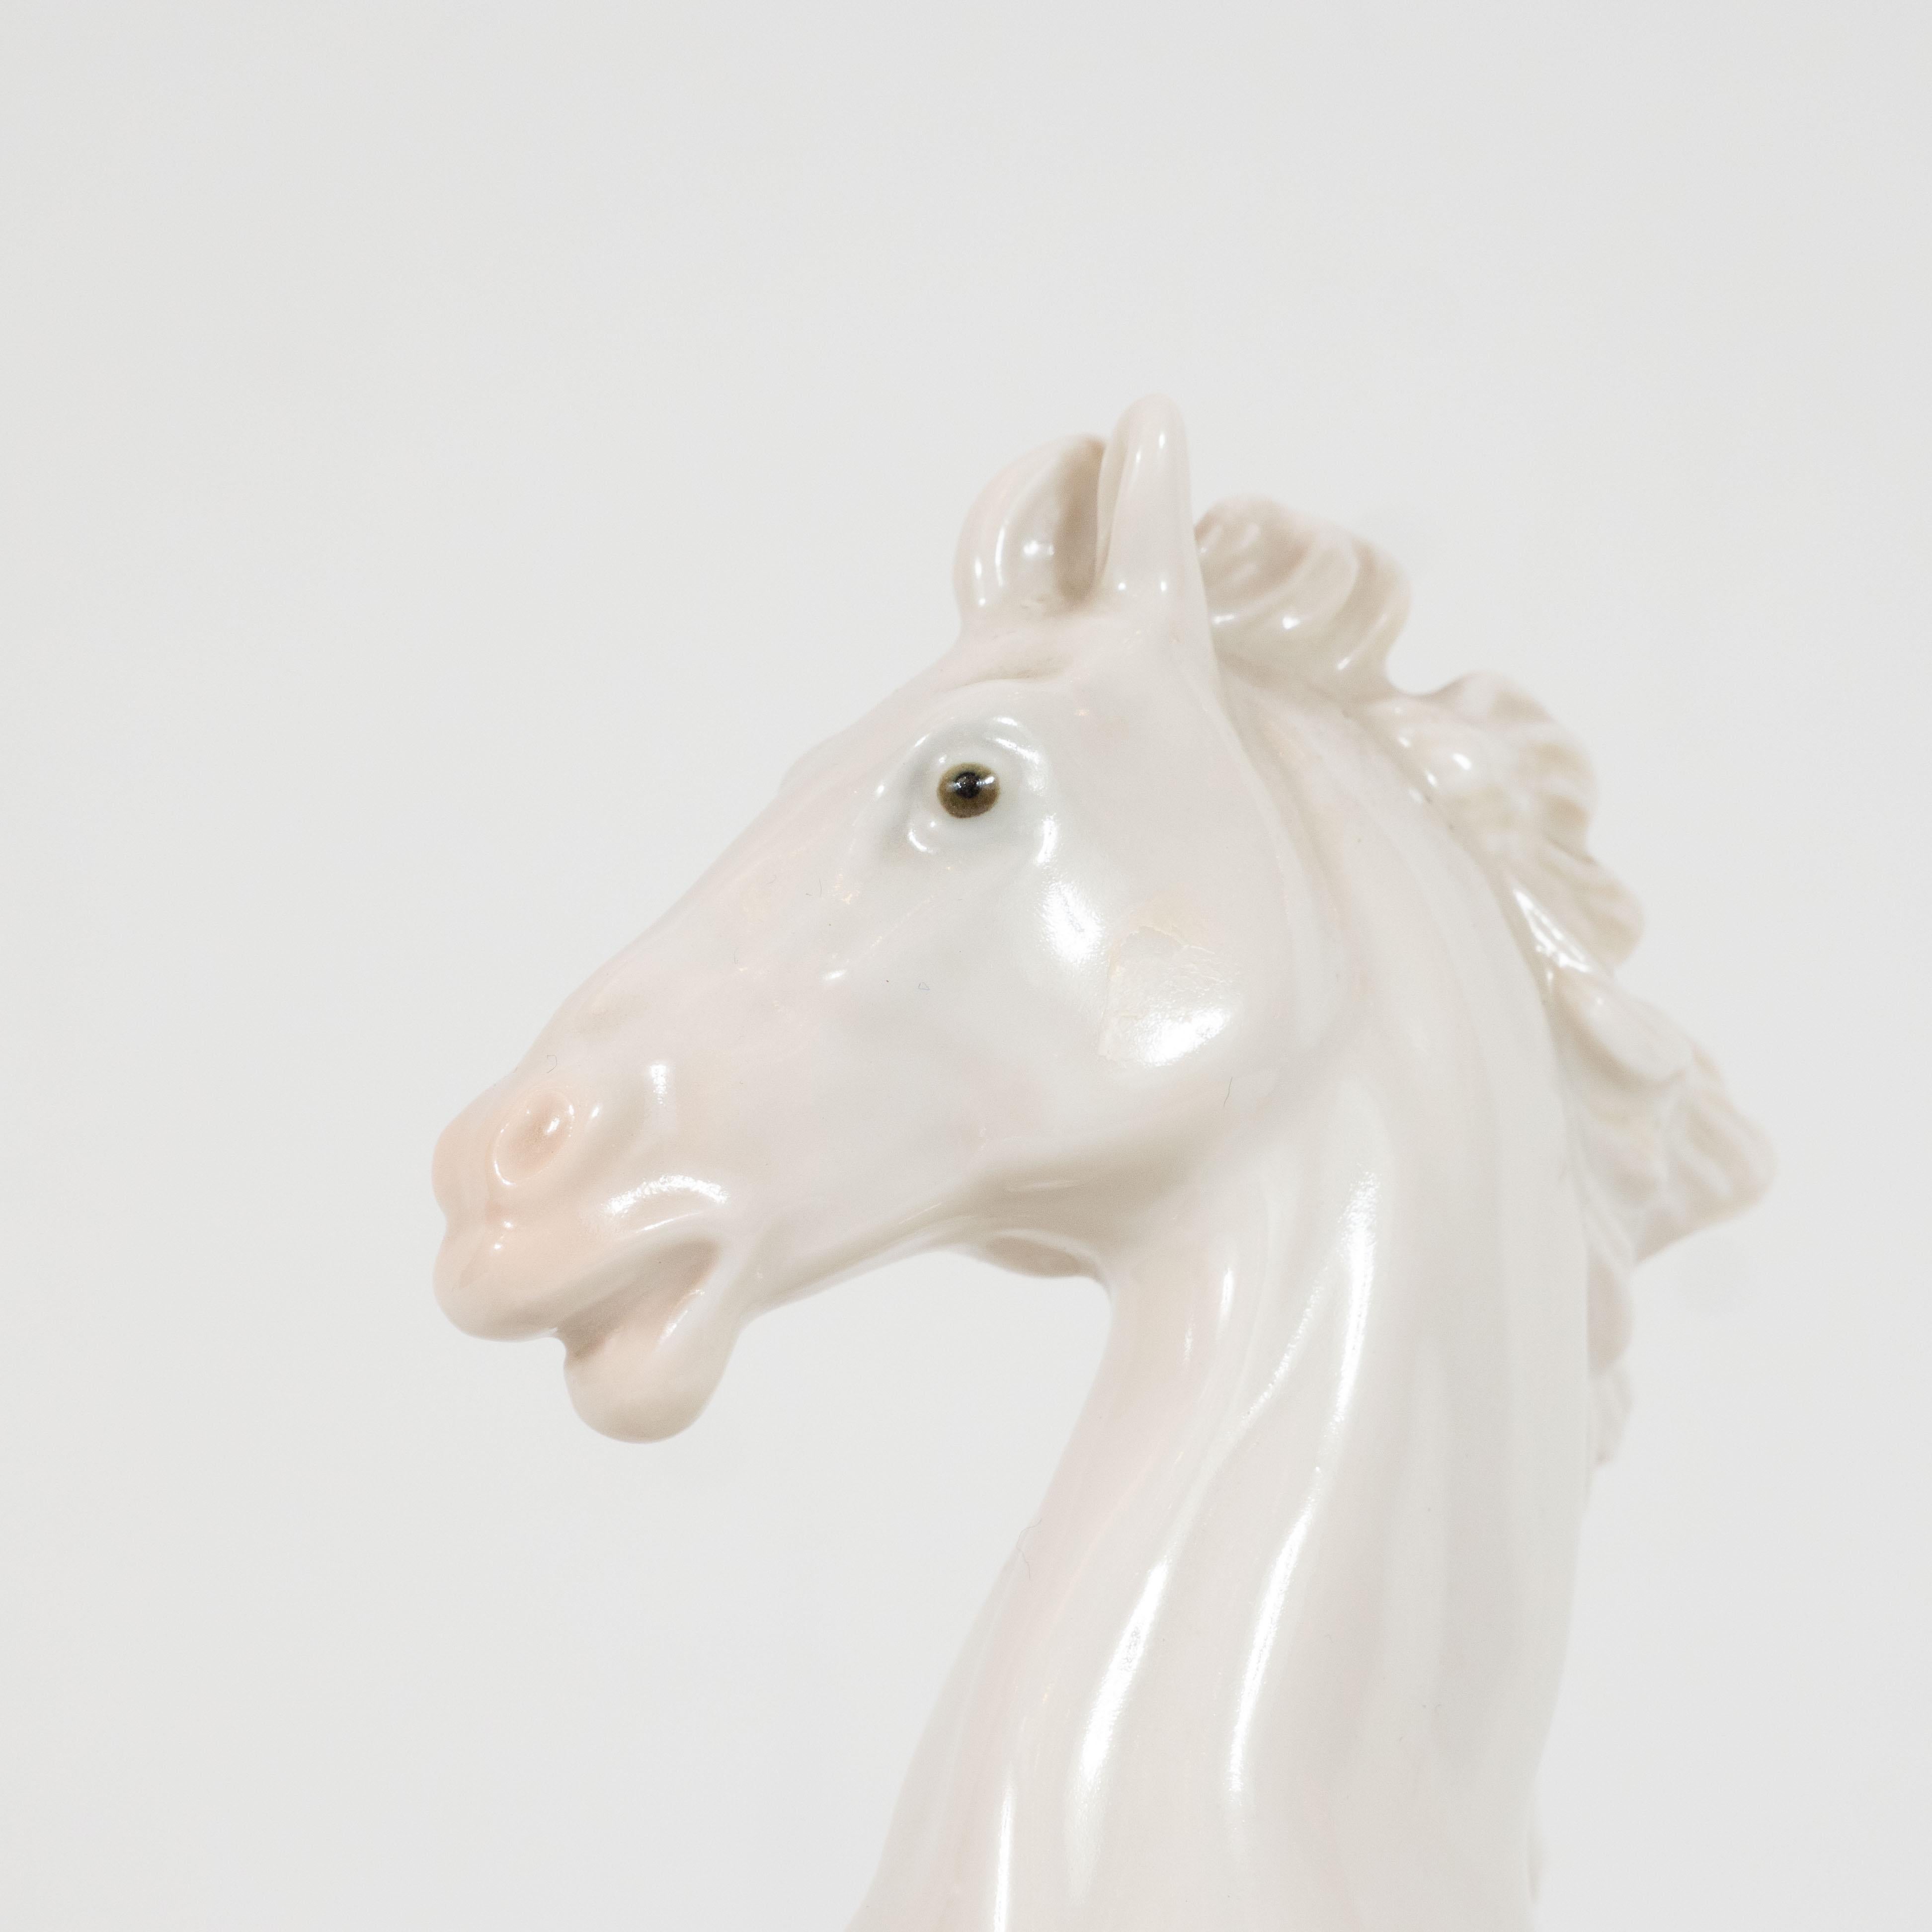 Mid-20th Century Art Deco White Porcelain Galloping Horse Sculptures Signed by Karl Ens For Sale